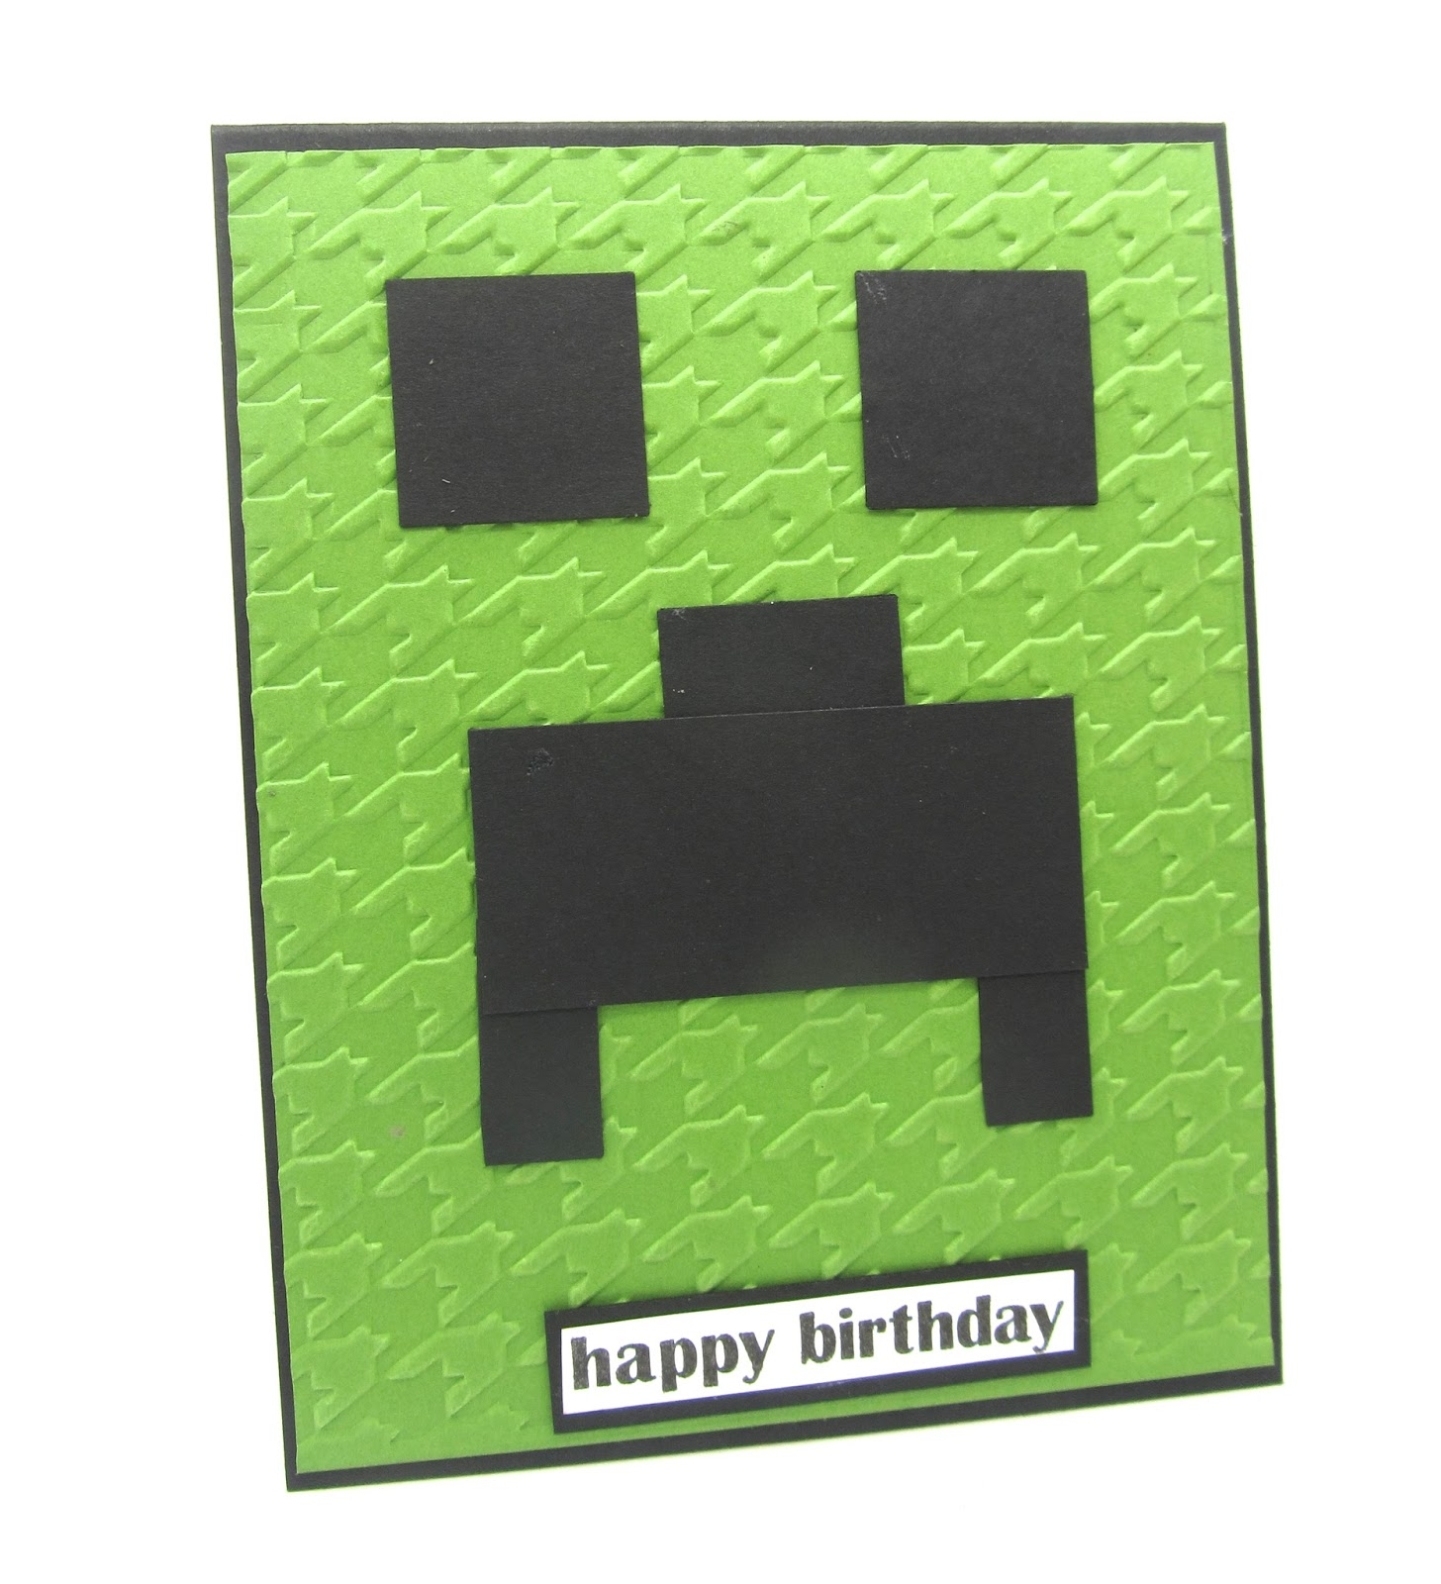 Minecraft Printable Birthday Cards That Are Witty | Roy Blog With Regard To Minecraft Birthday Card Template